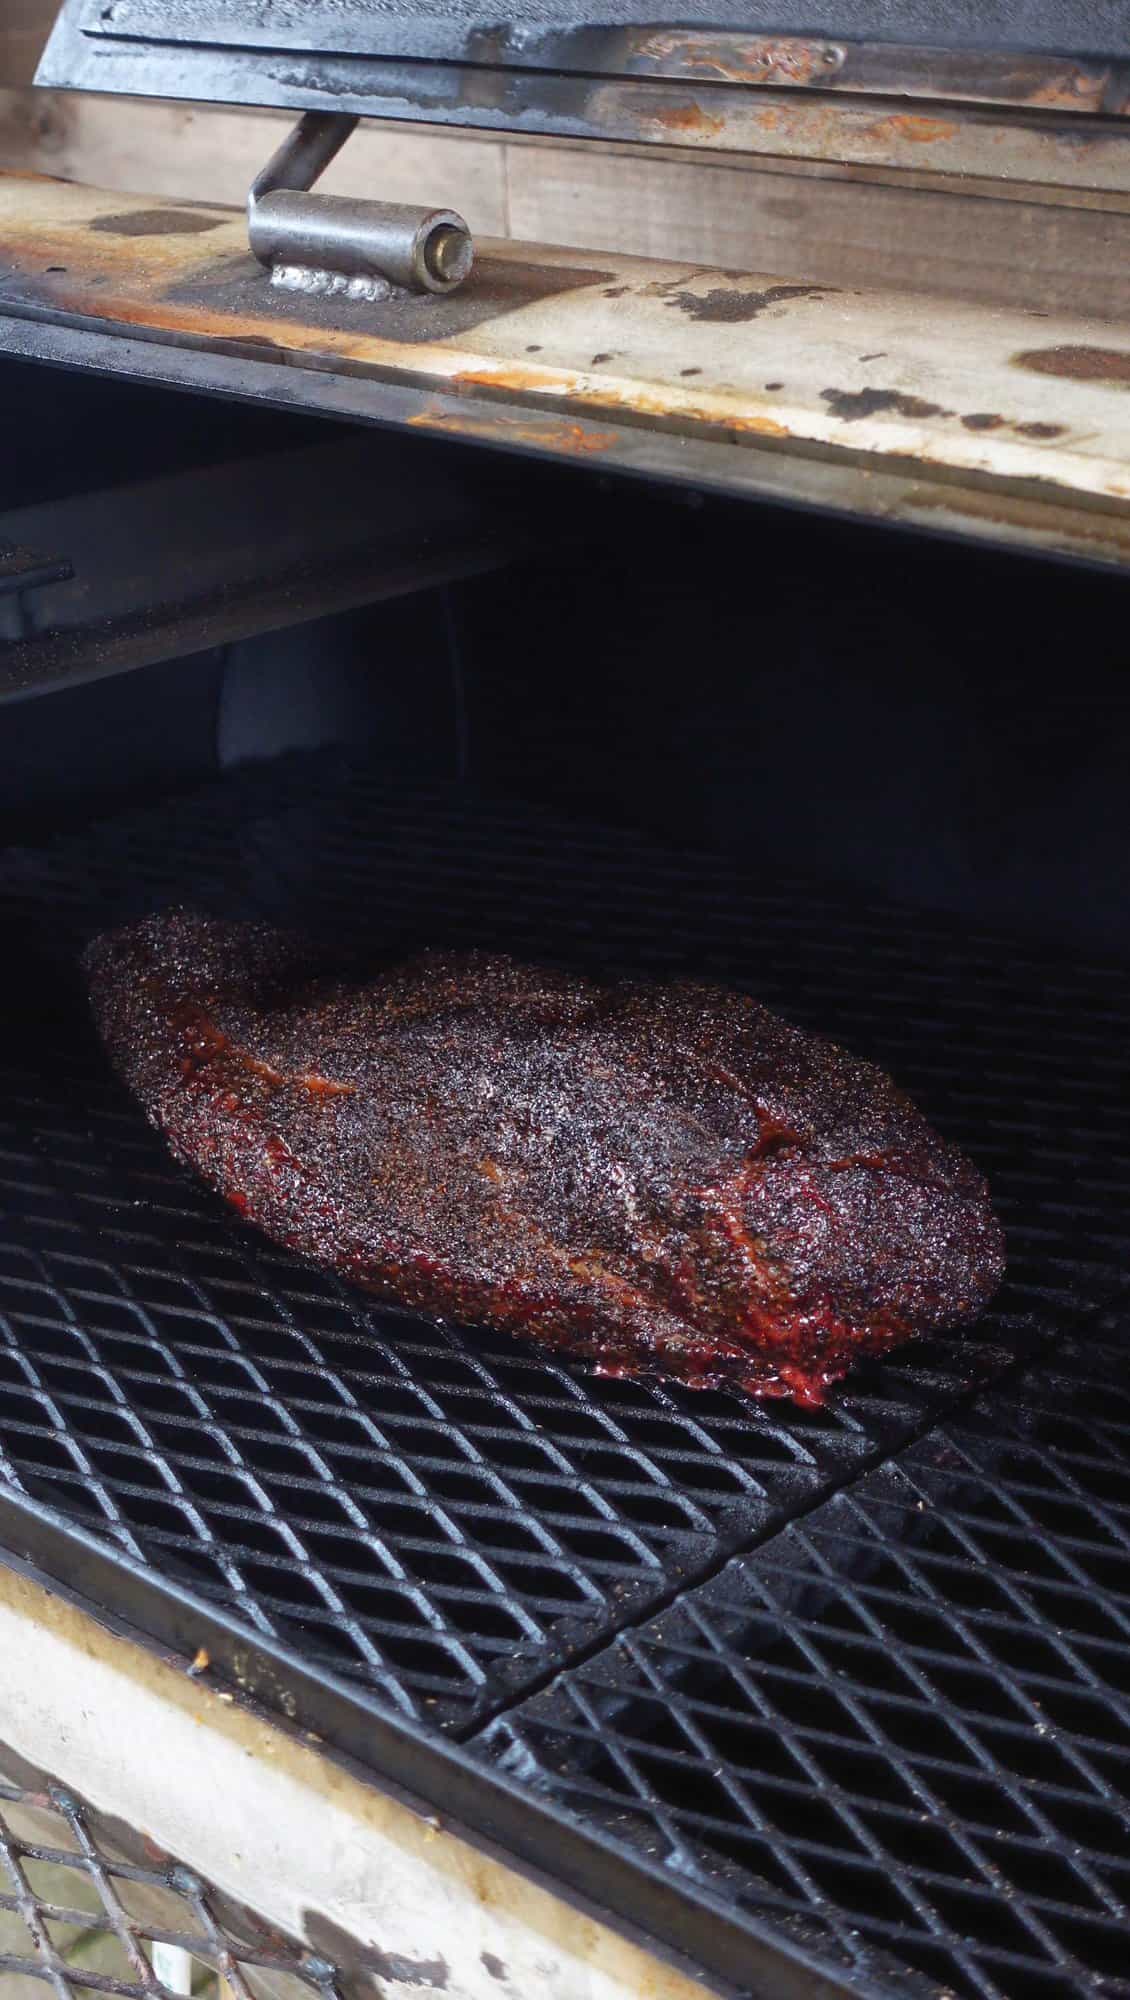 A hot of the brisket cooking on the smoker.